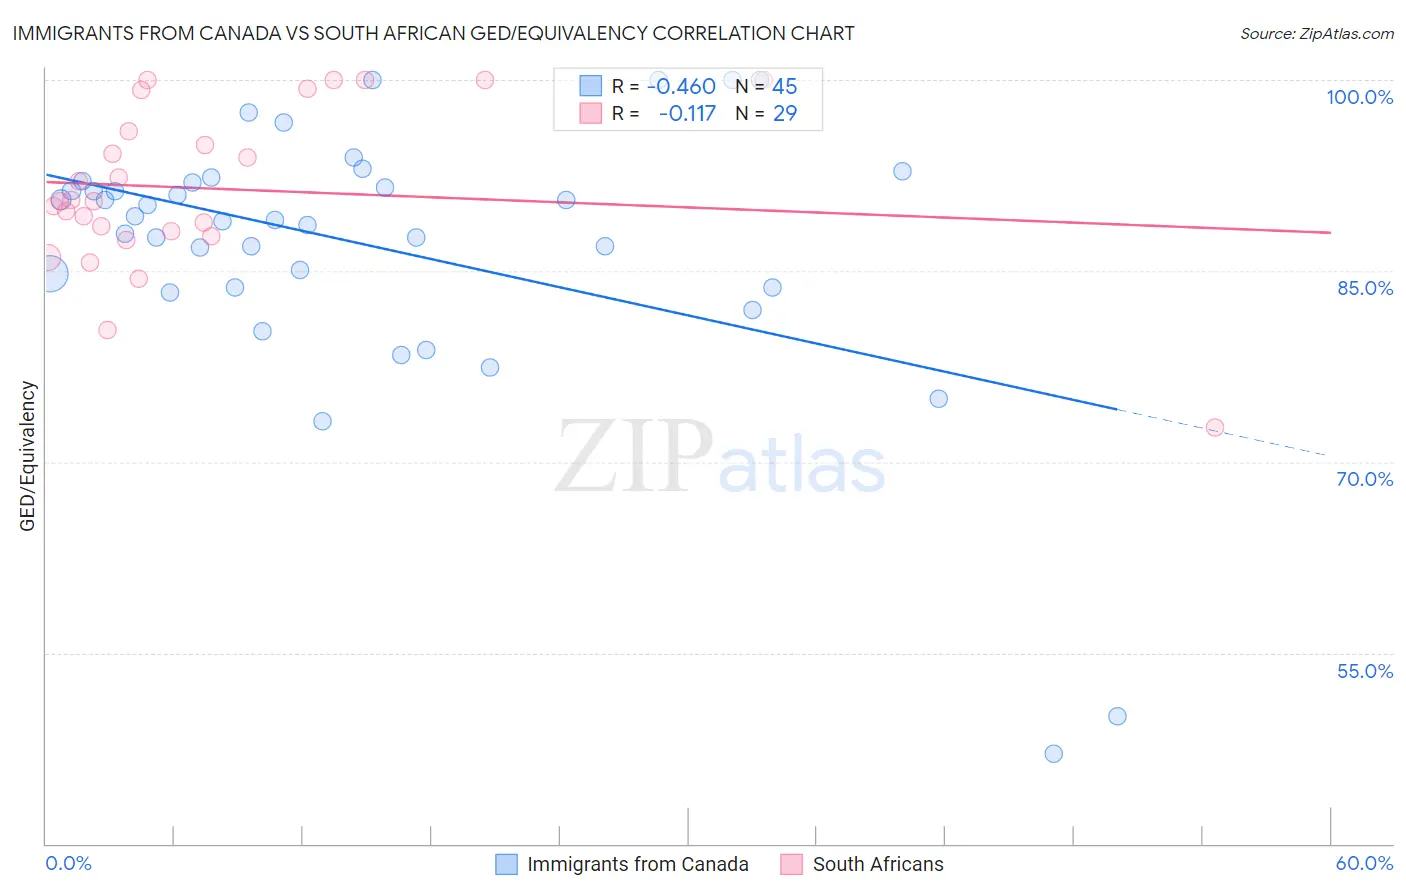 Immigrants from Canada vs South African GED/Equivalency